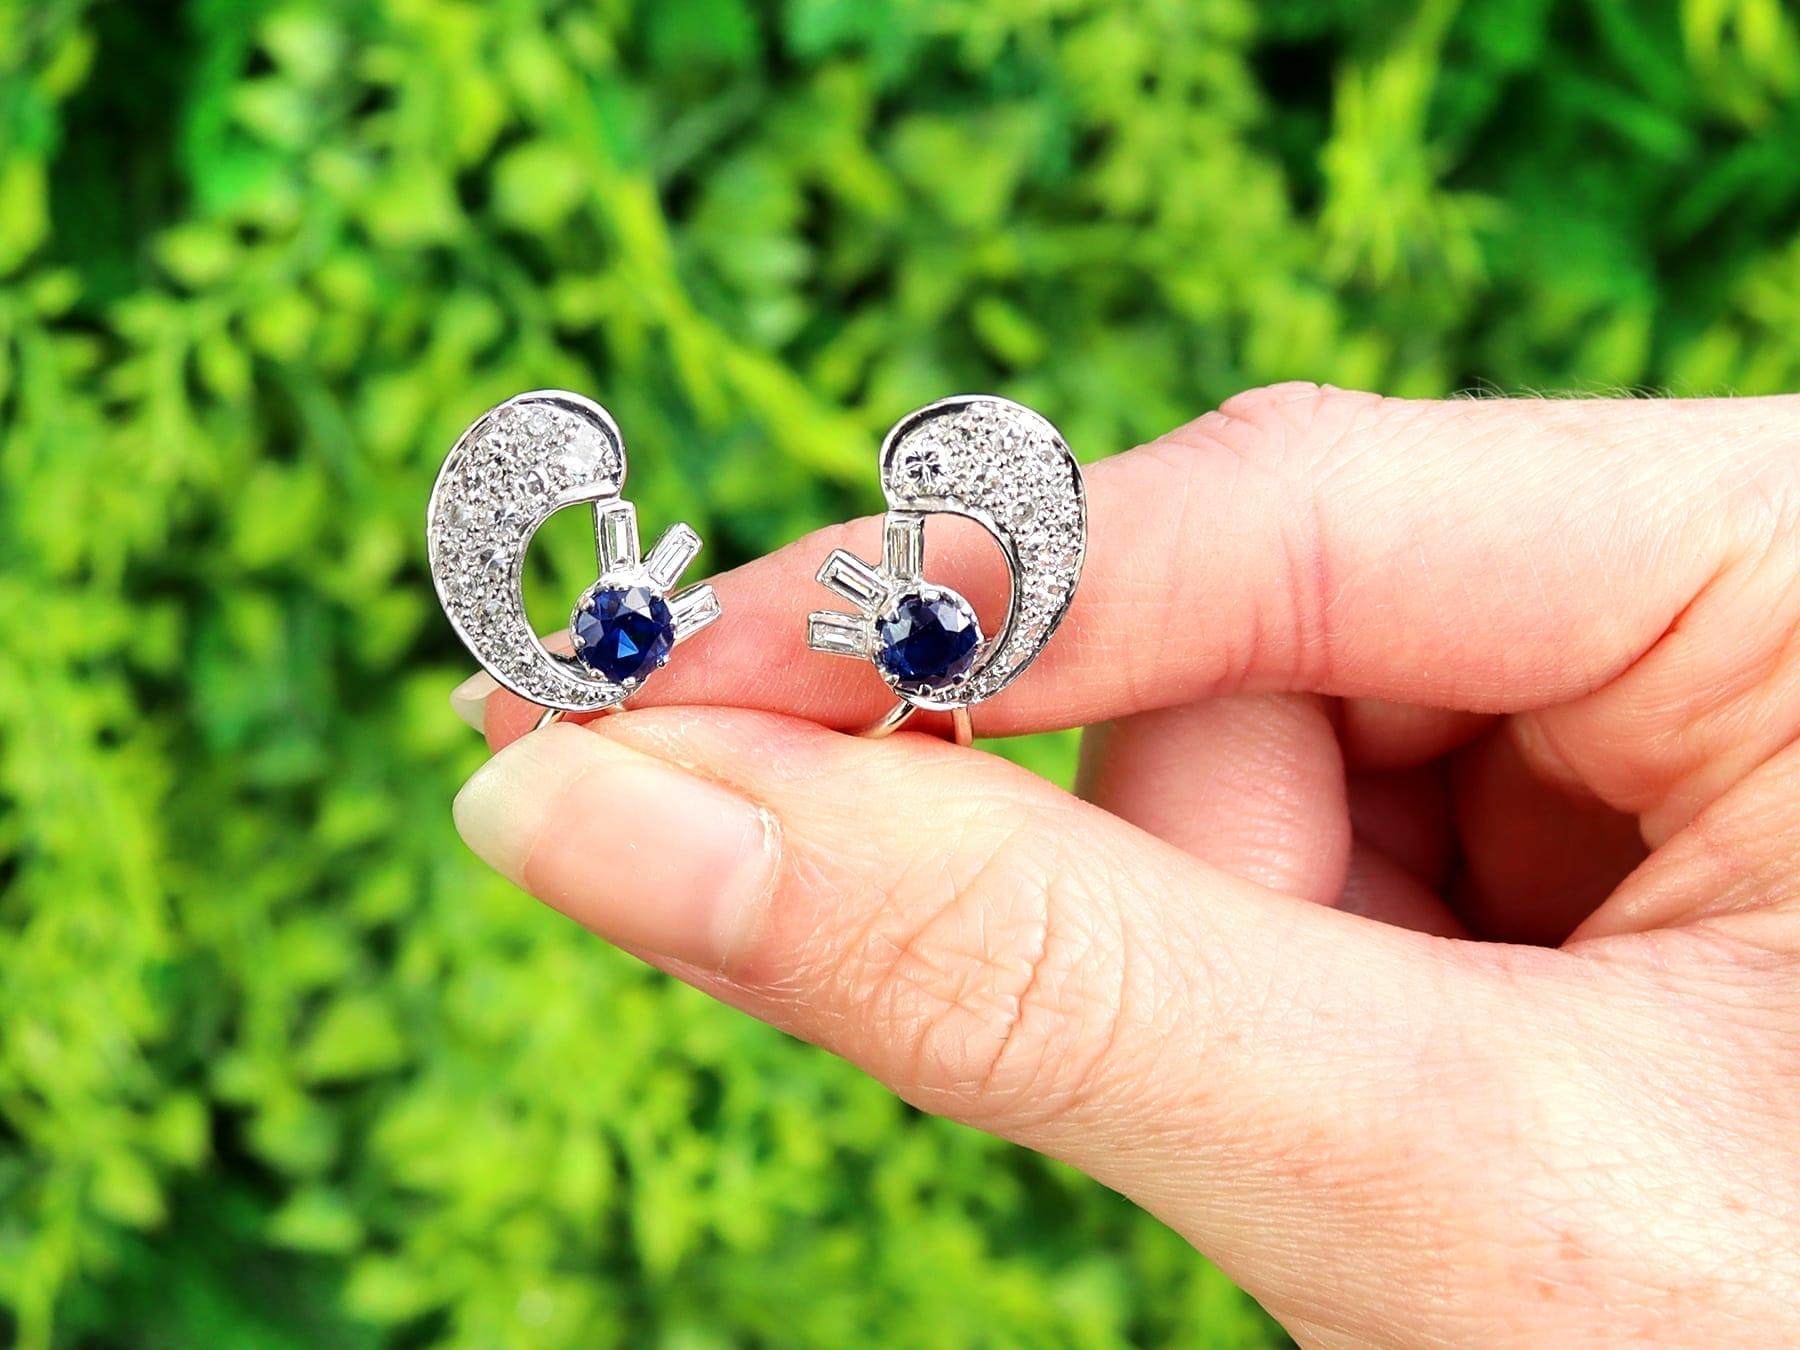 An impressive pair of 1.04 carat sapphire and 1.75 carat diamond, 18 karat and 9 karat white gold clip on earrings; part of our diverse antique jewelry and estate jewelry collections.

These fine and impressive antique sapphire earrings have been